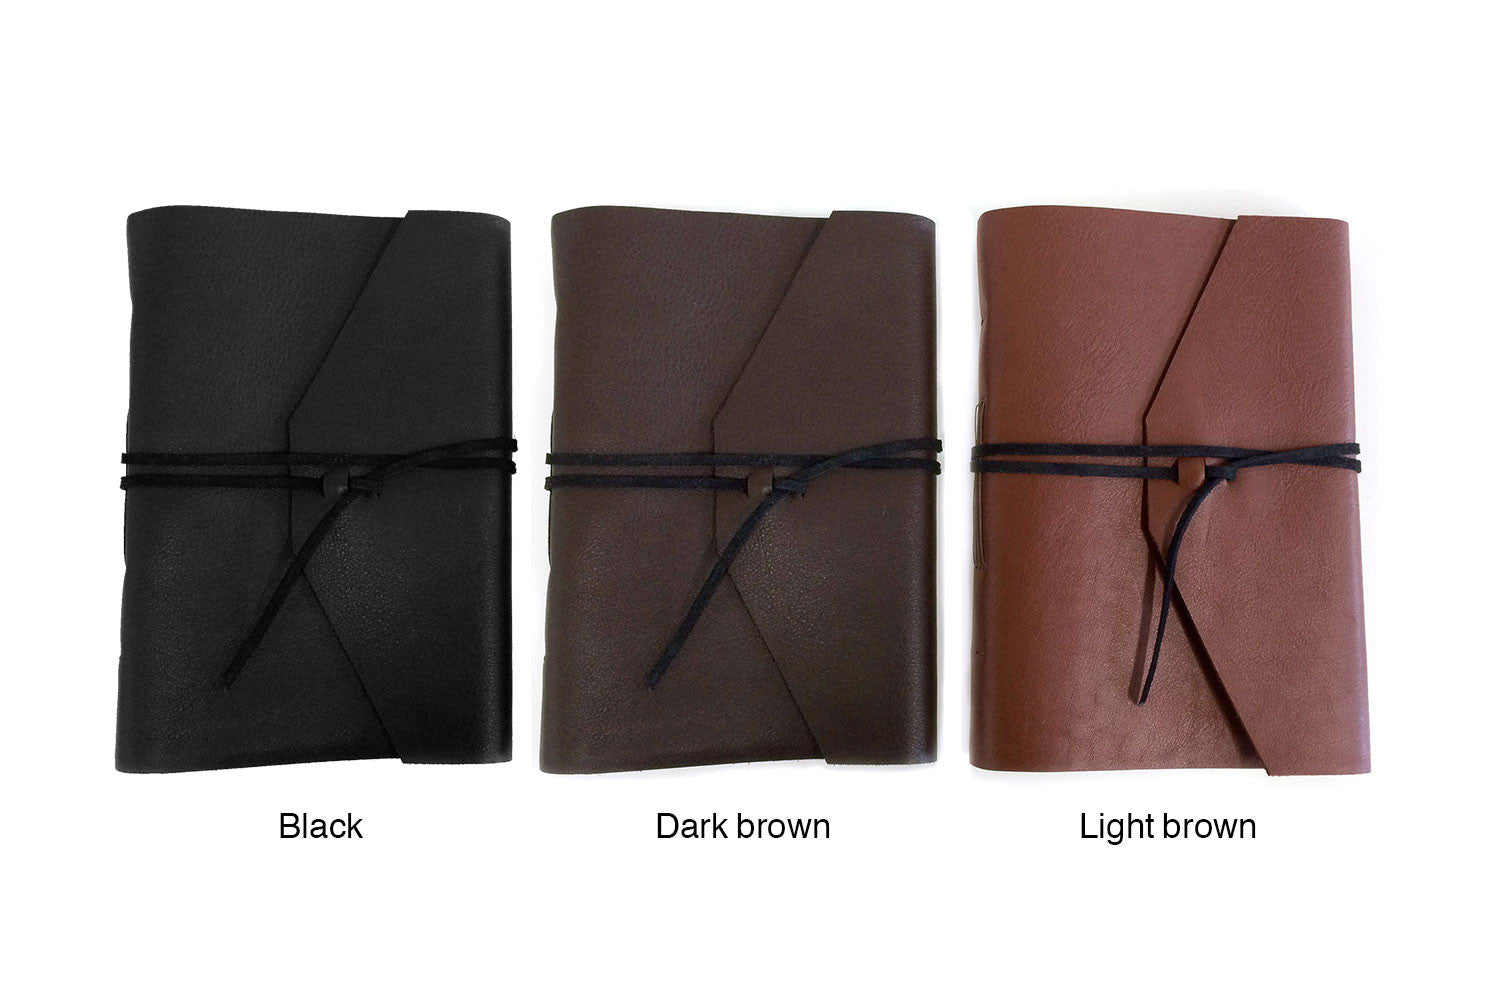 Leather journal in black leather, dark brown leather, or light brown leather from Bookshell